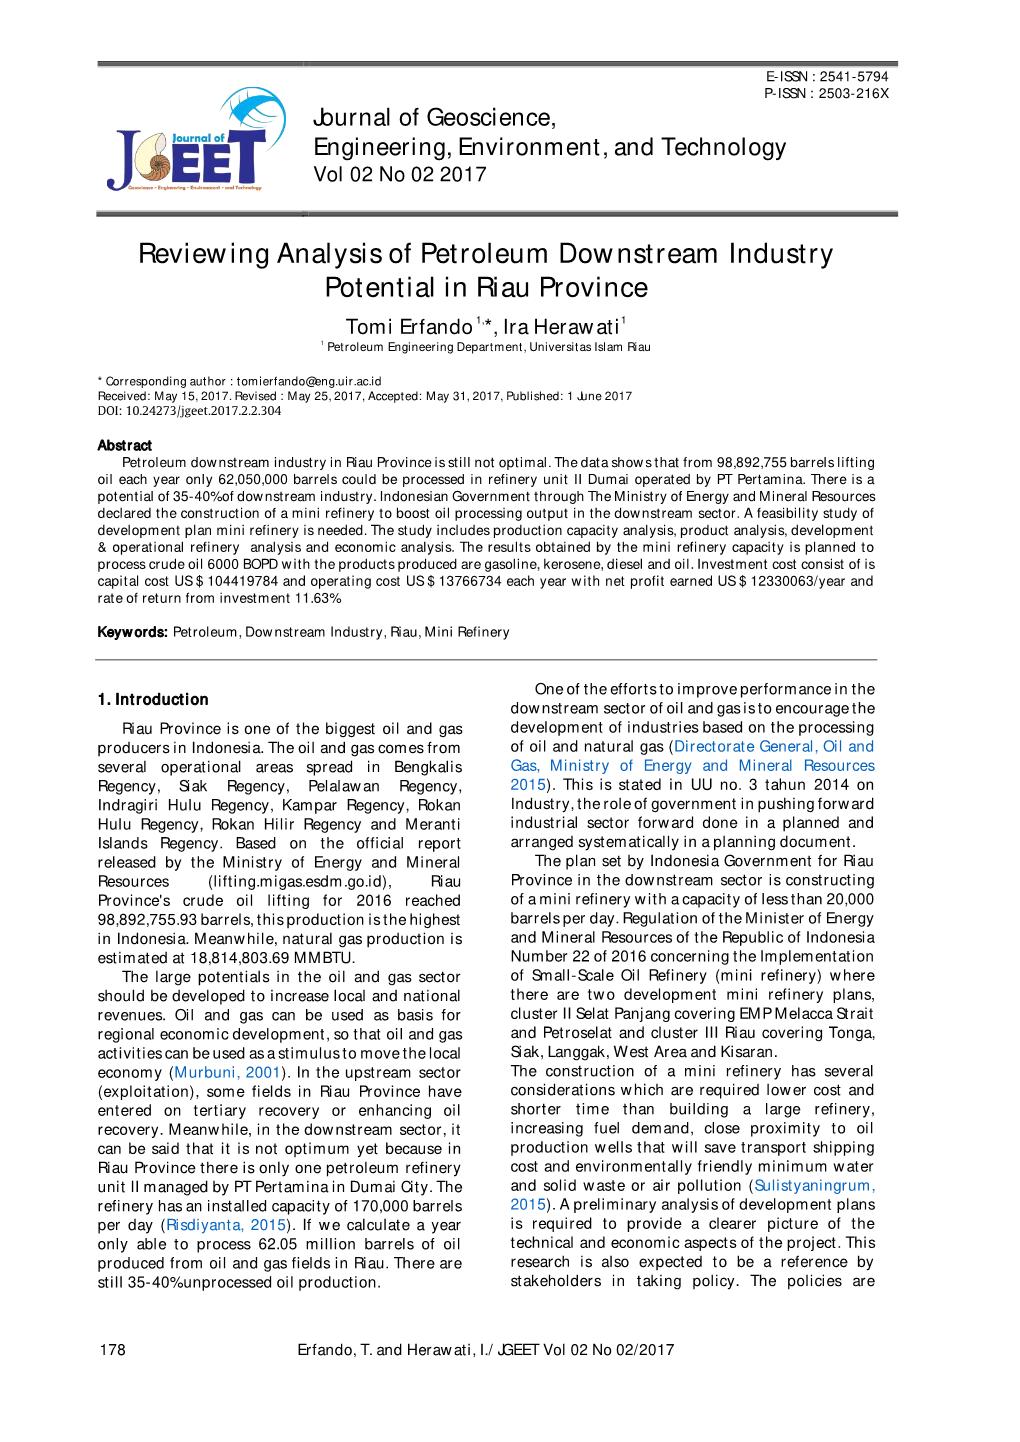 Reviewing Analysis of Petroleum Downstream Industry